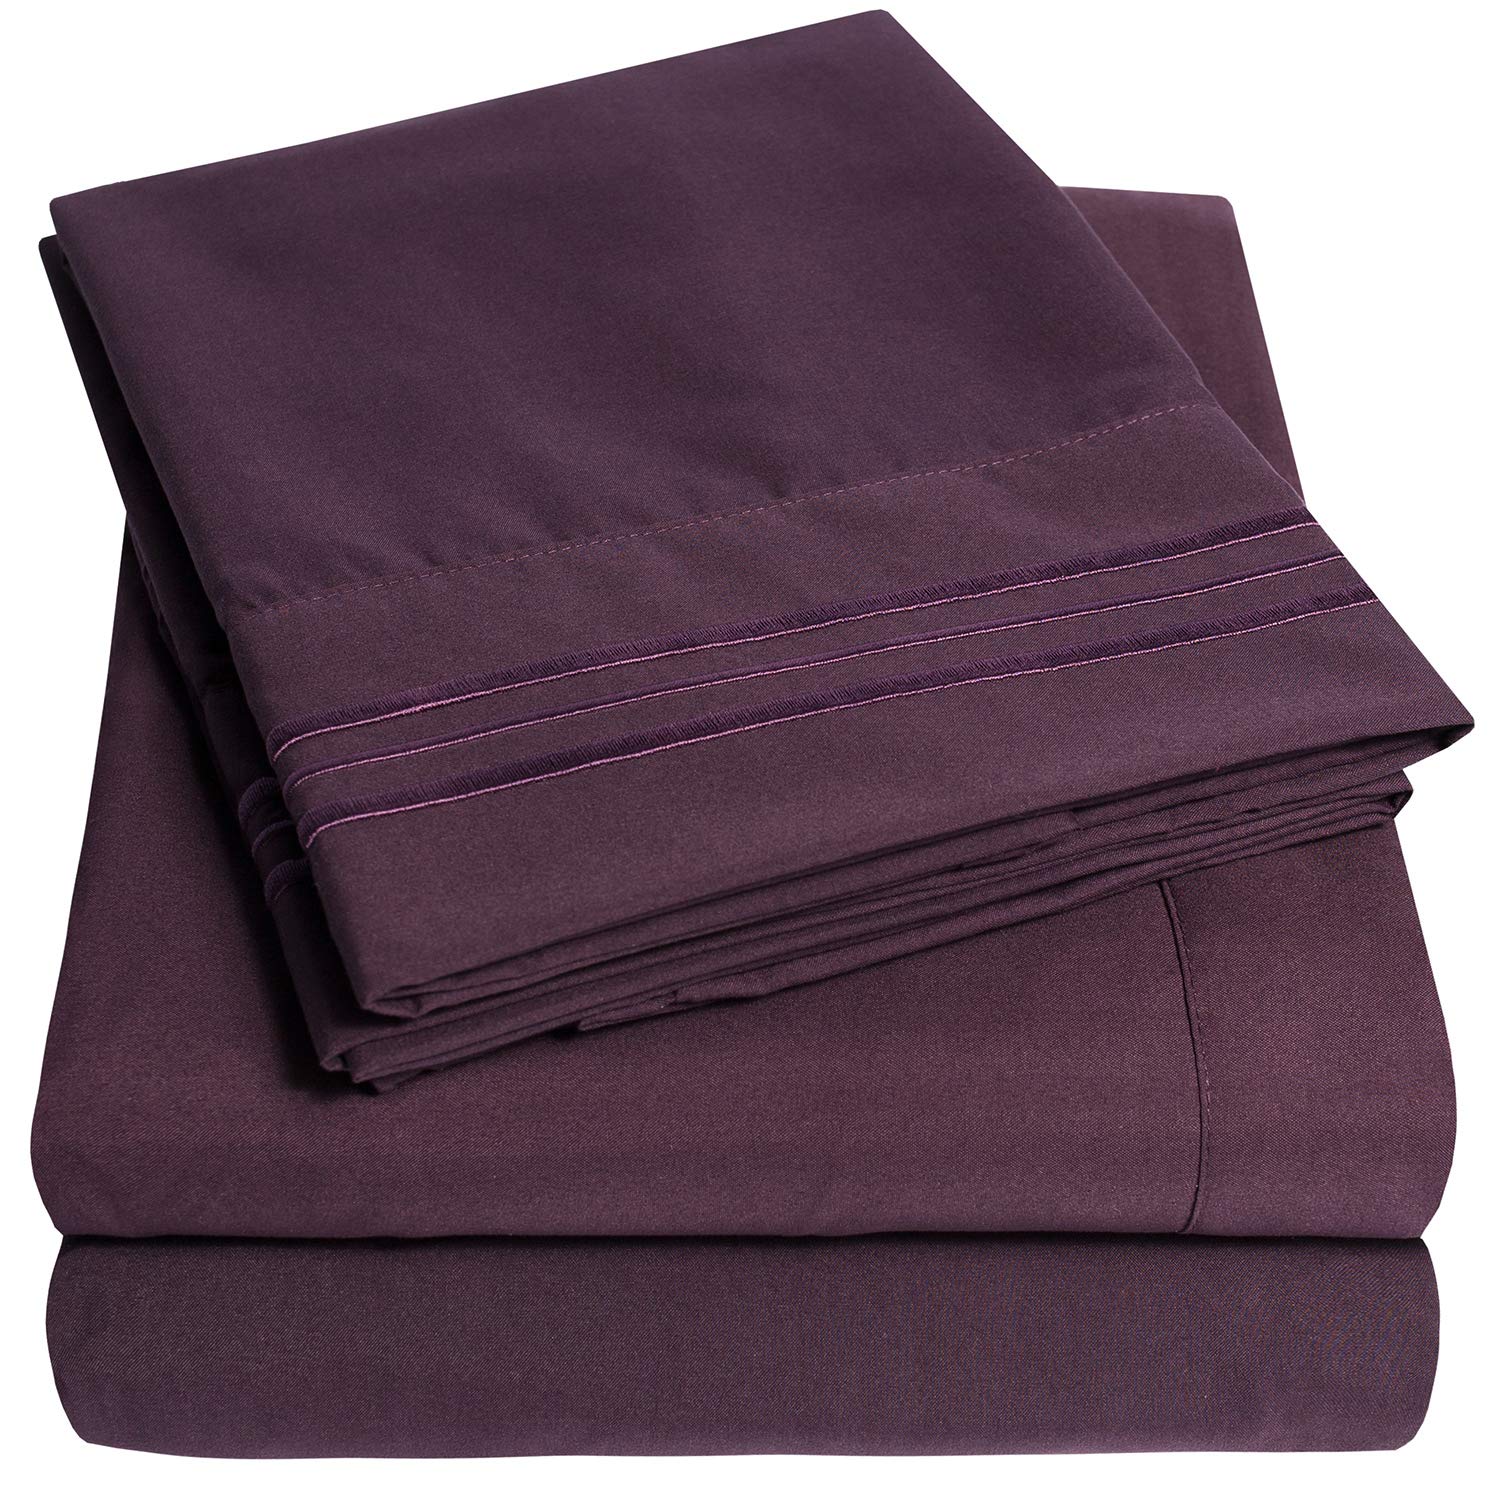 Book Cover 1500 Supreme Collection California King Sheet Sets Purple- Luxury Hotel Bed Sheets and Pillowcase Set for California King Mattress - Extra Soft, Elastic Corner Straps, Deep Pocket Sheets Purple California King Purple